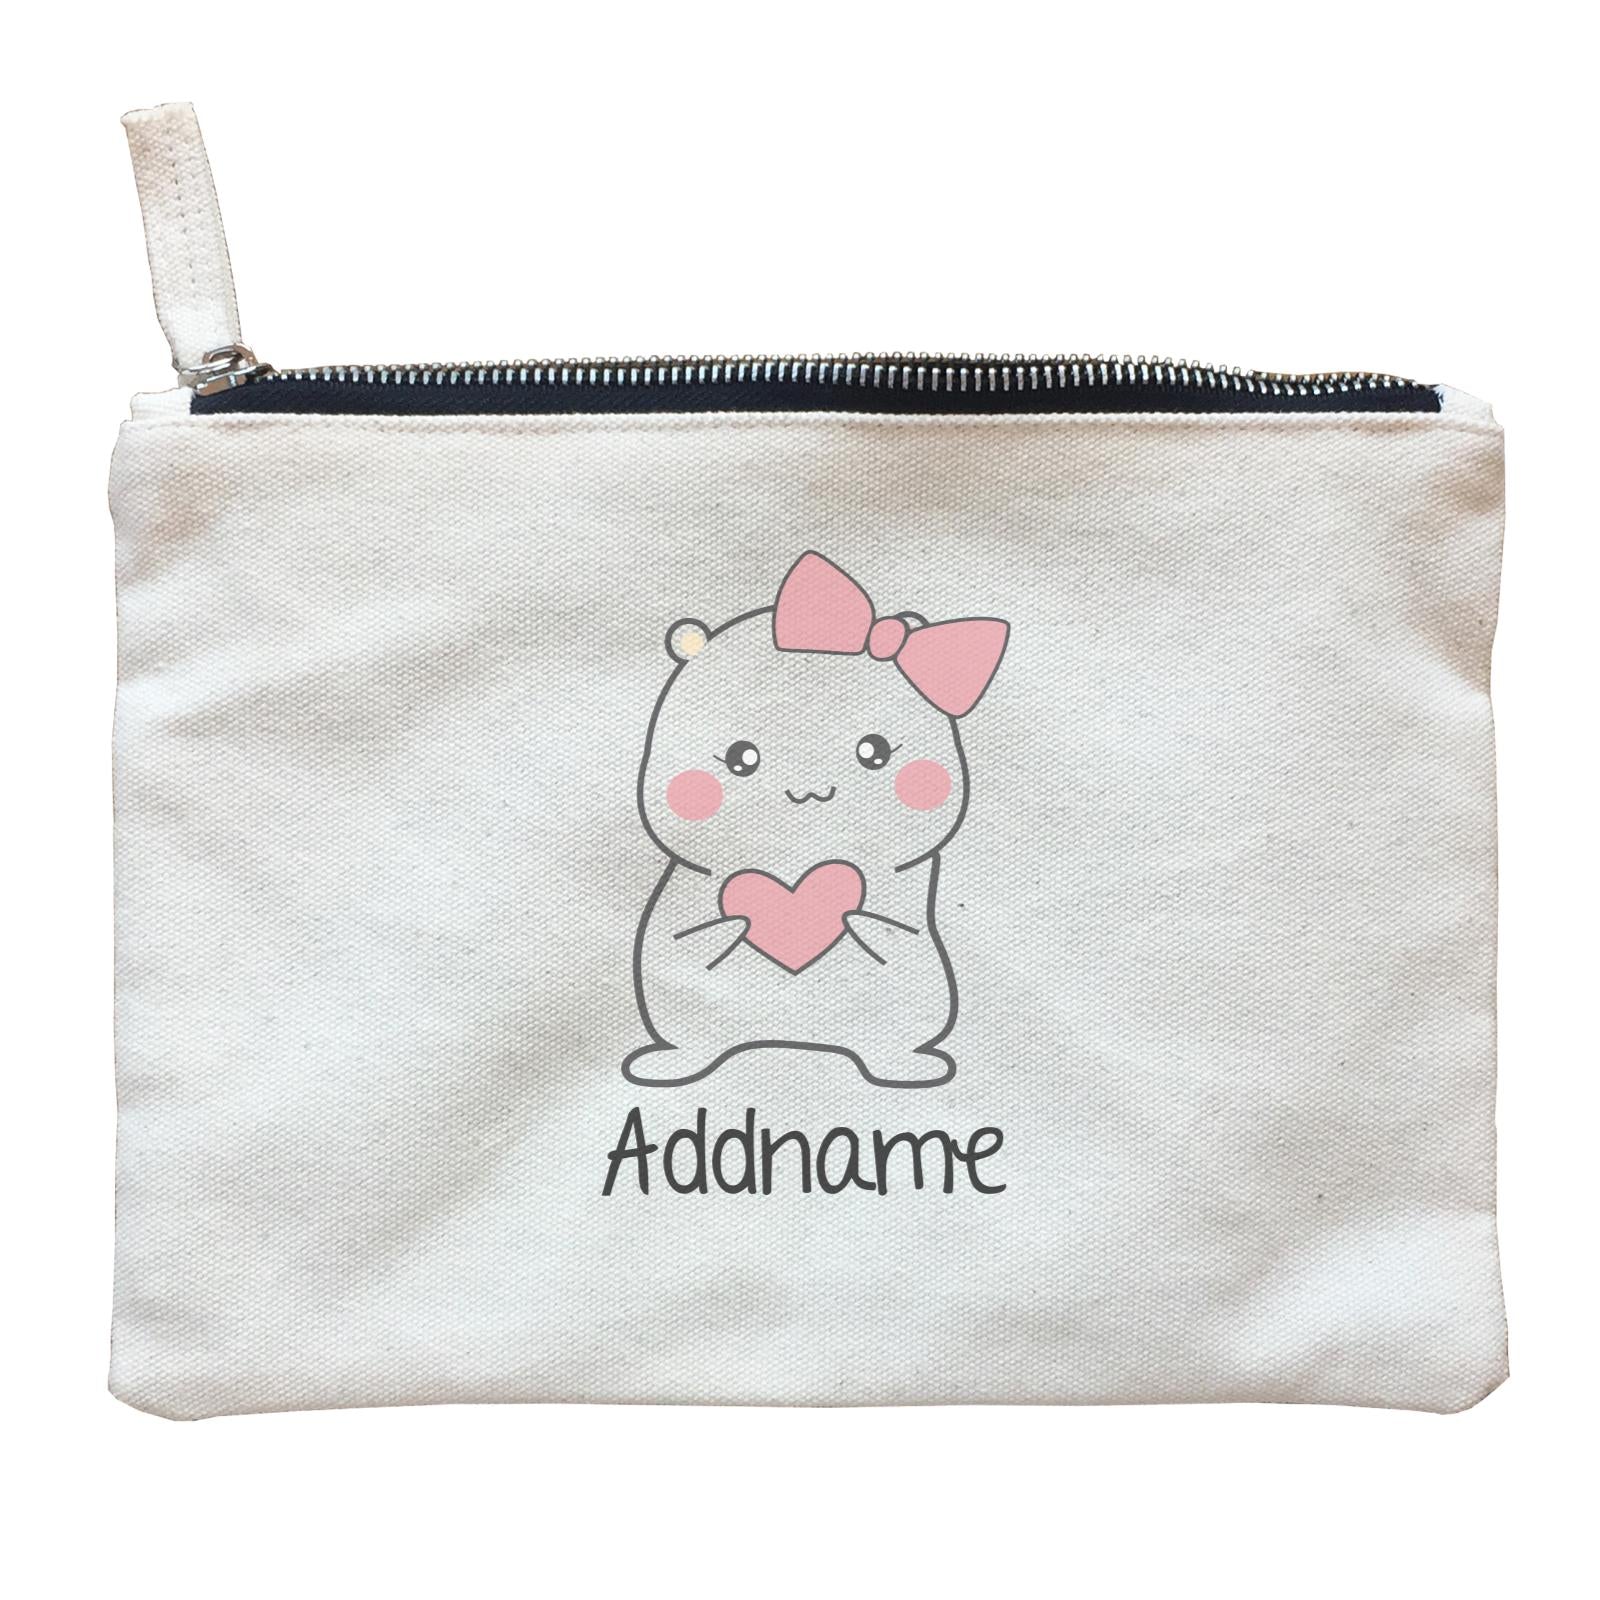 Cute Hamster Mommy Addname Zipper Pouch